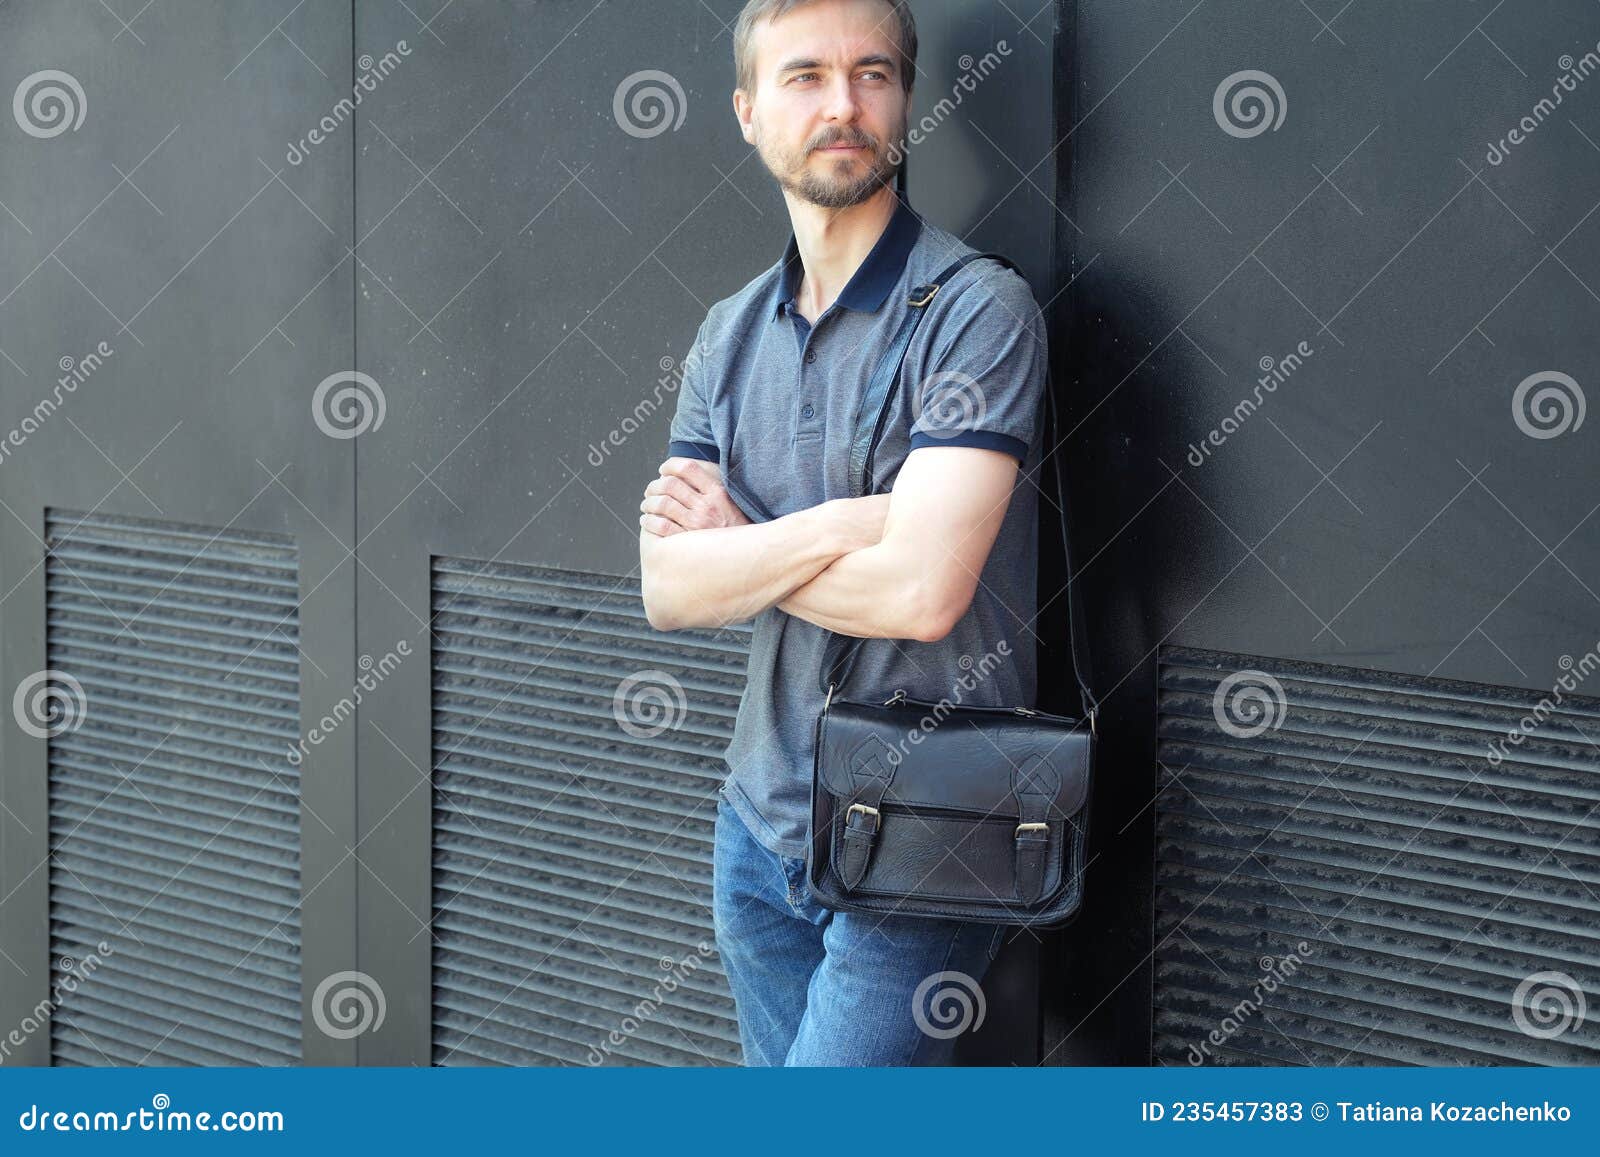 handsome bearded millennial casual wearing man with stylish leather bag standing near black wall in the city streeet